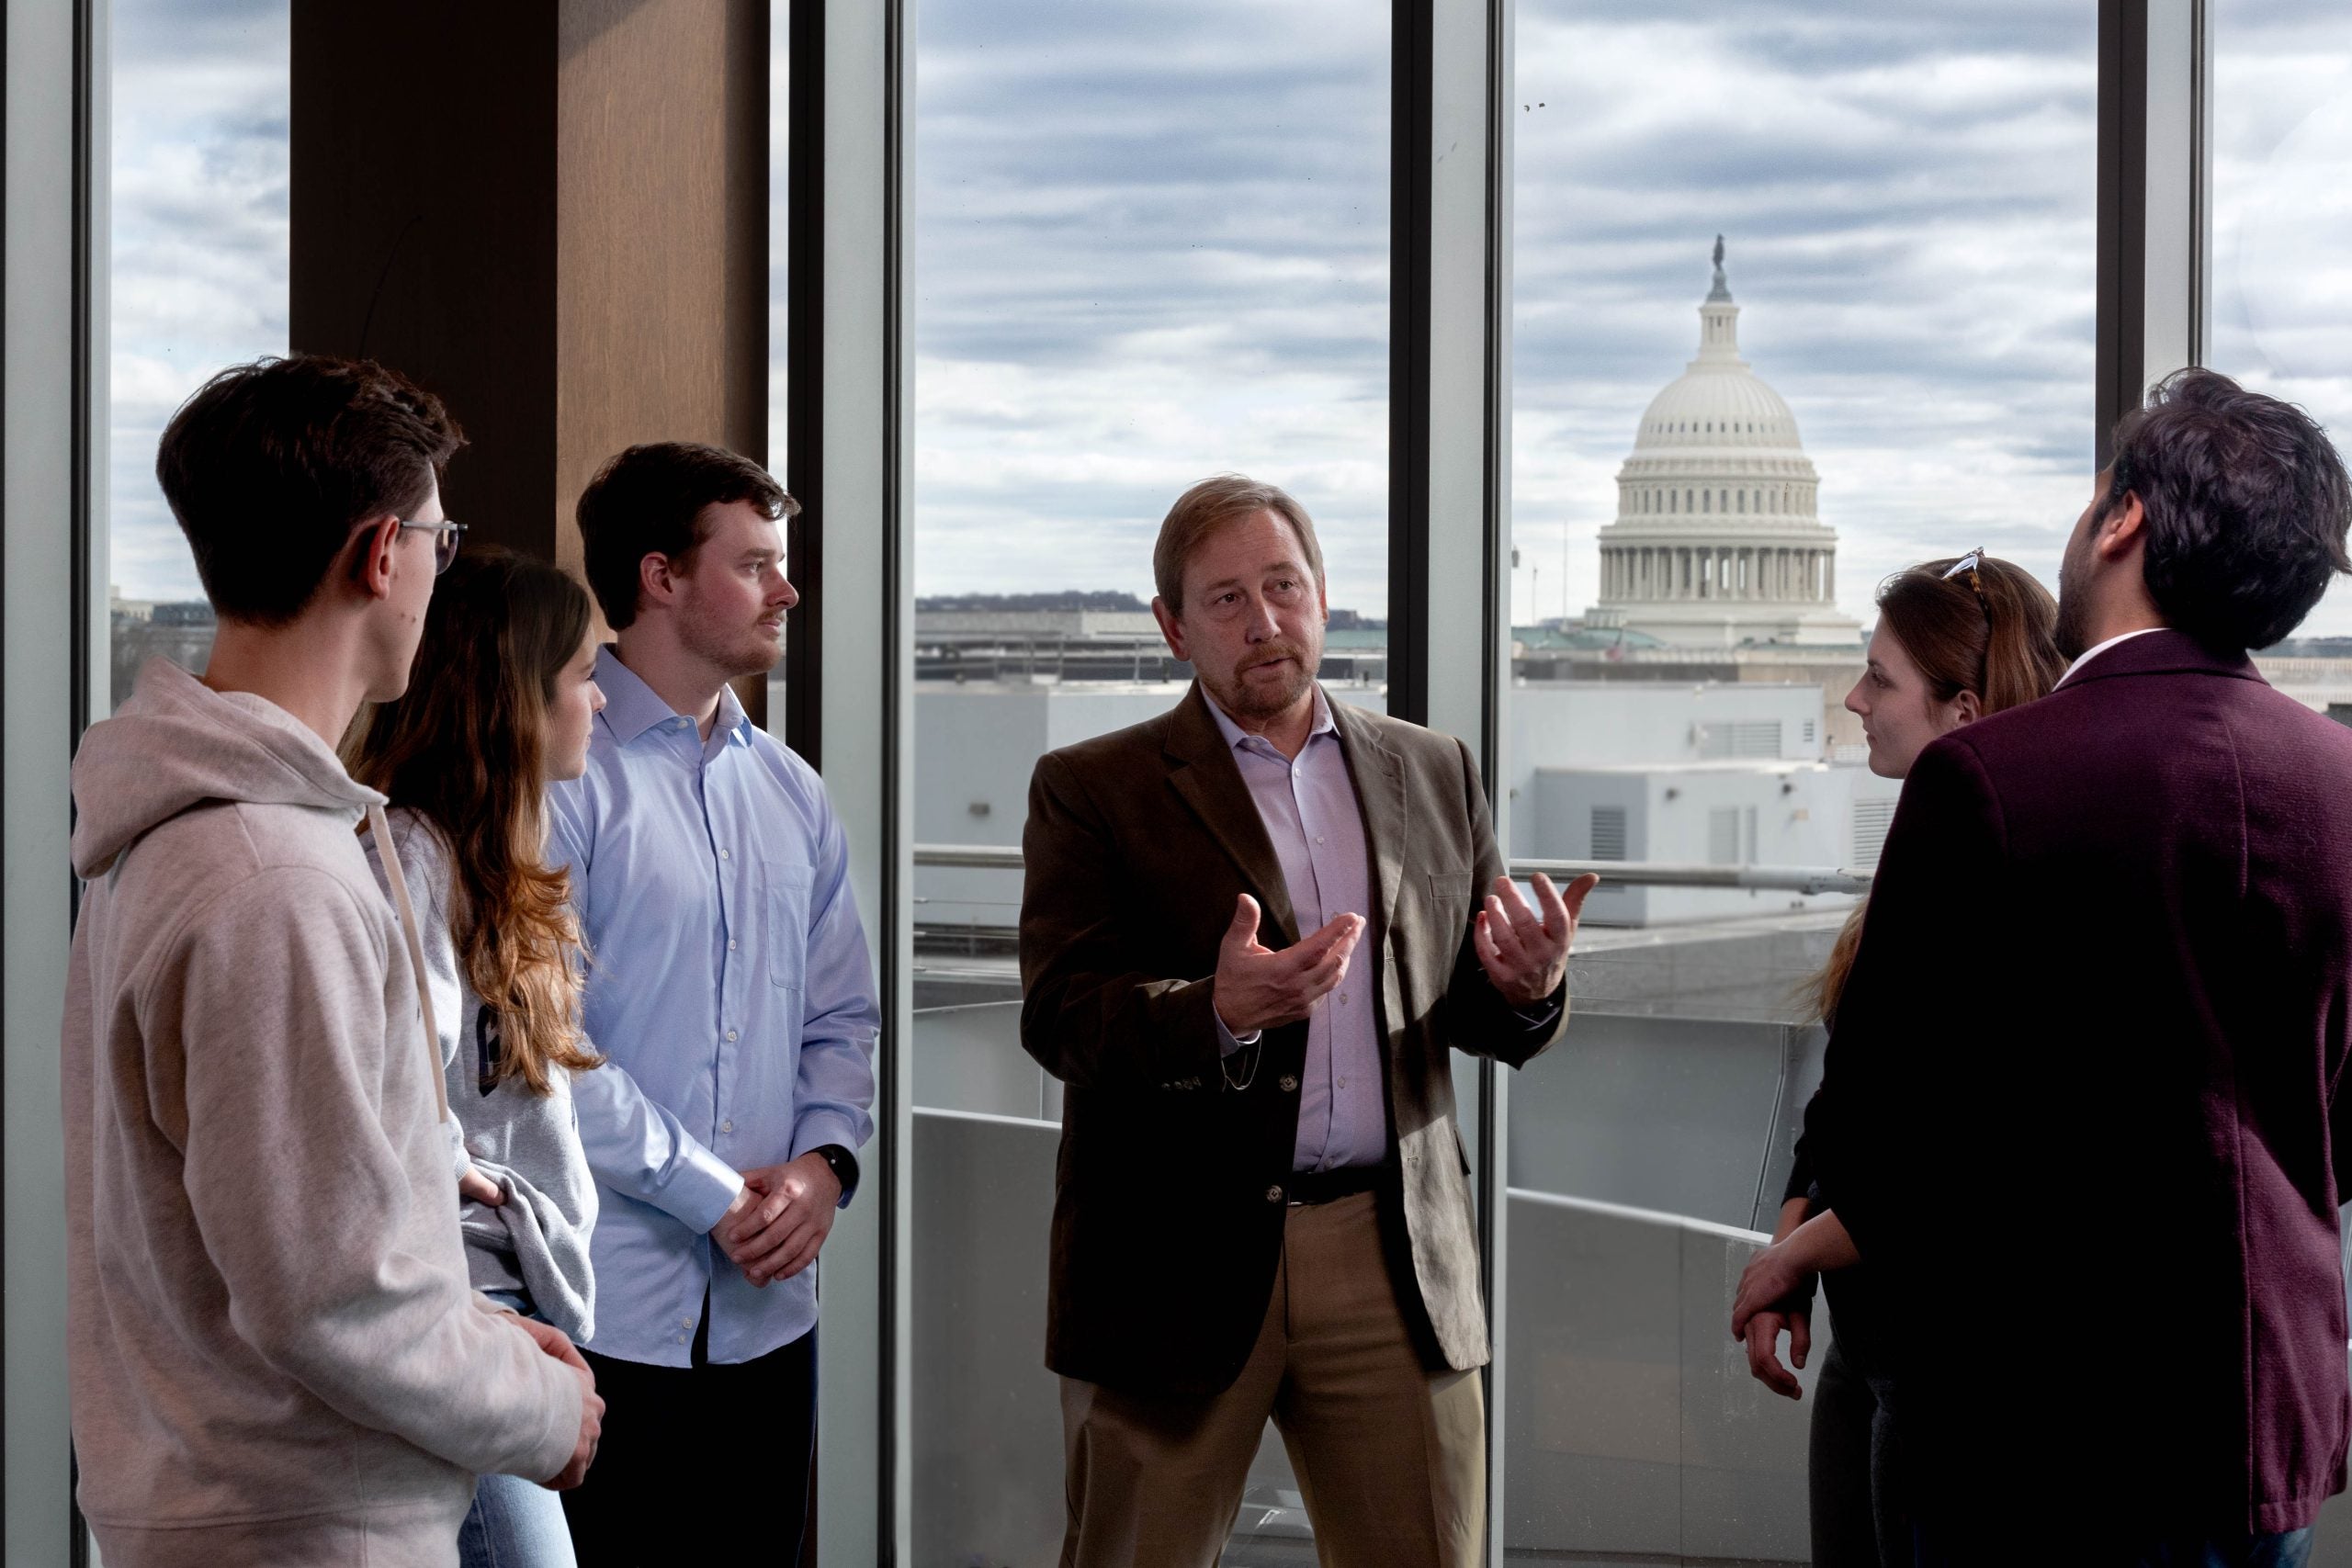 A professor talking to five students with a view of the Capitol in the background.